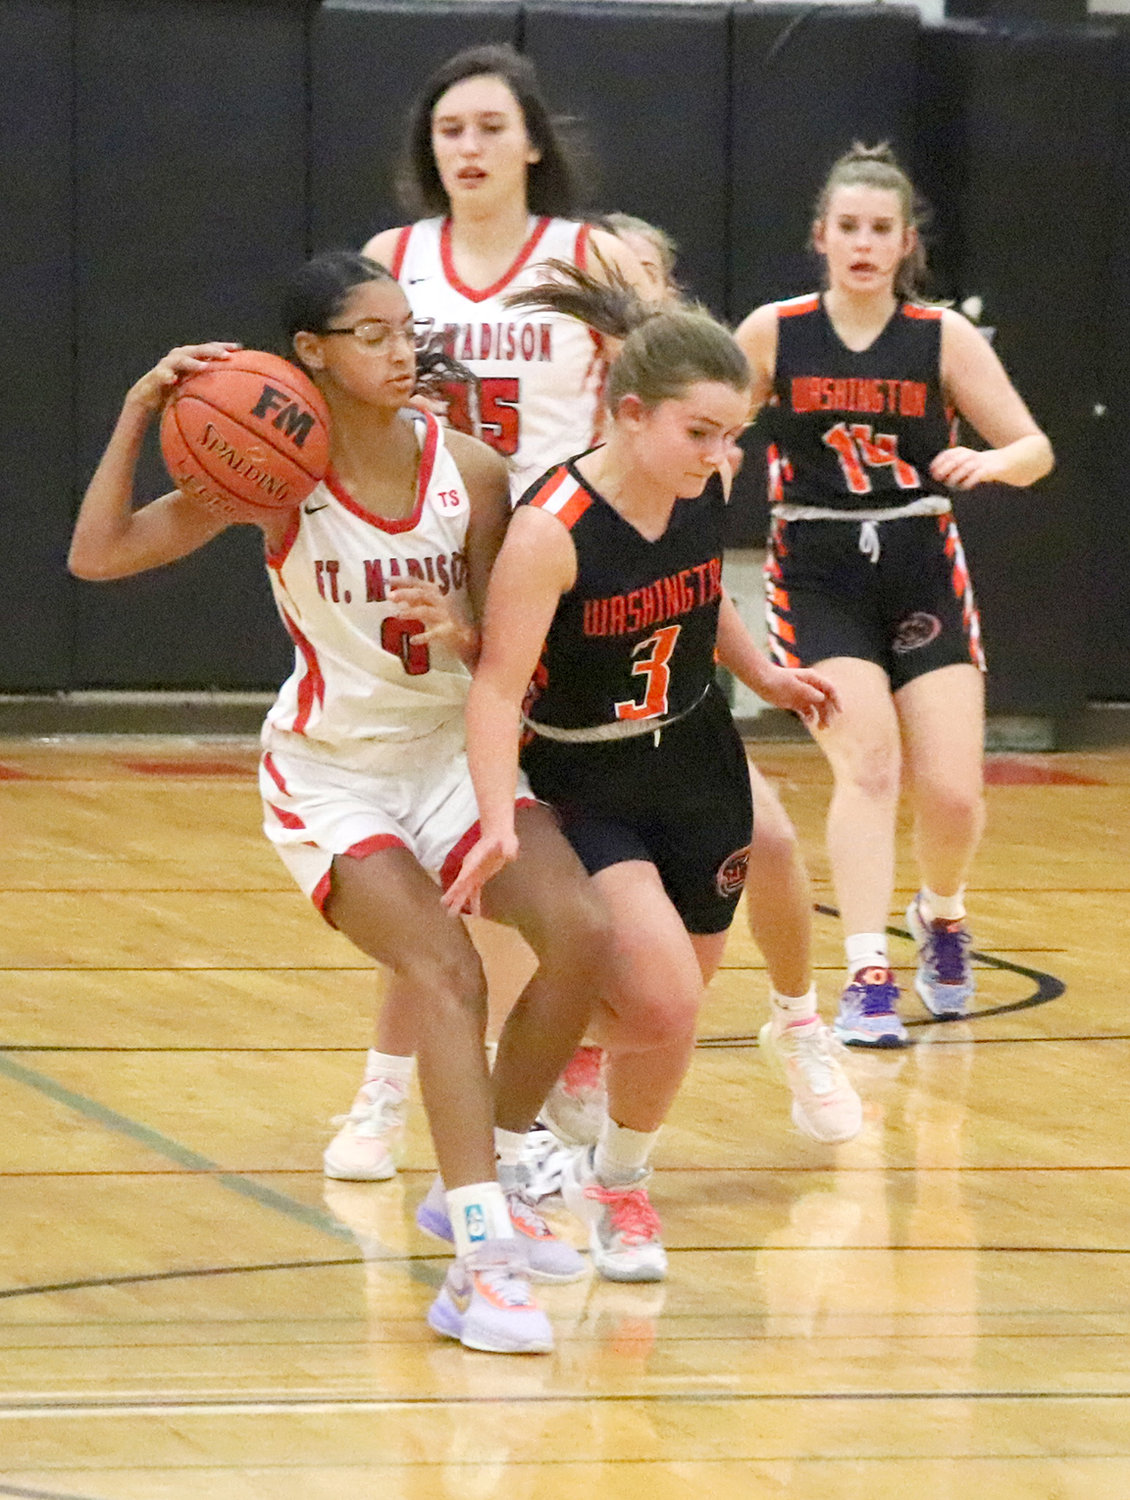 Fort Madison’s Aija Jenkins (0) wrestles the  ball away from Washington’s Makenna Conrad in the 4th quarter Tuesday night in Fort Madison. The Hounds won 52-46.